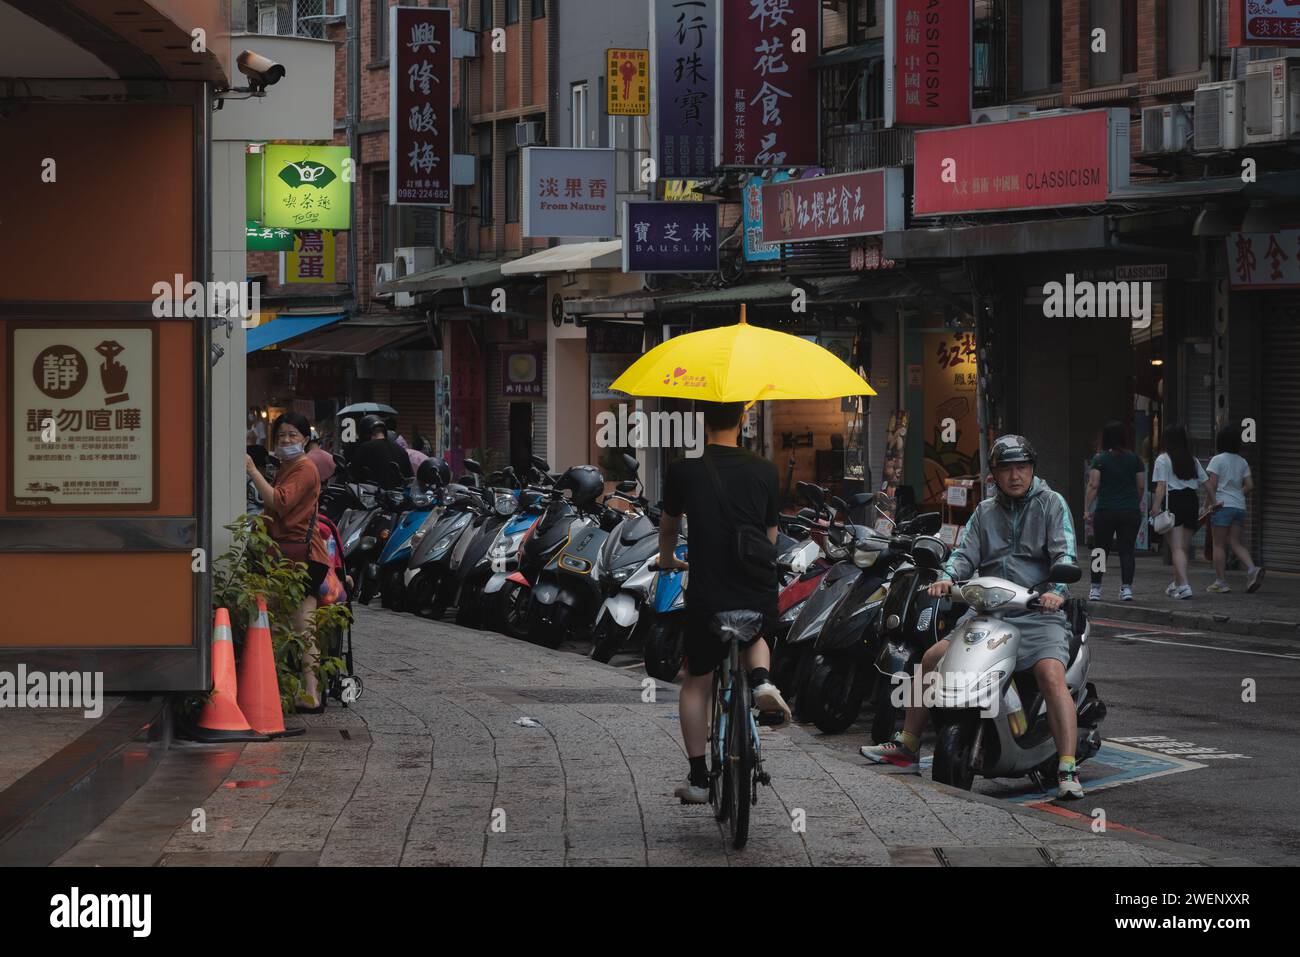 Taipei, Taiwan - October 1, 2023: Busy, colourful urban people and street scenes in the bustling Tamsui District, on a rainly day in Taipei, Taiwan. Stock Photo